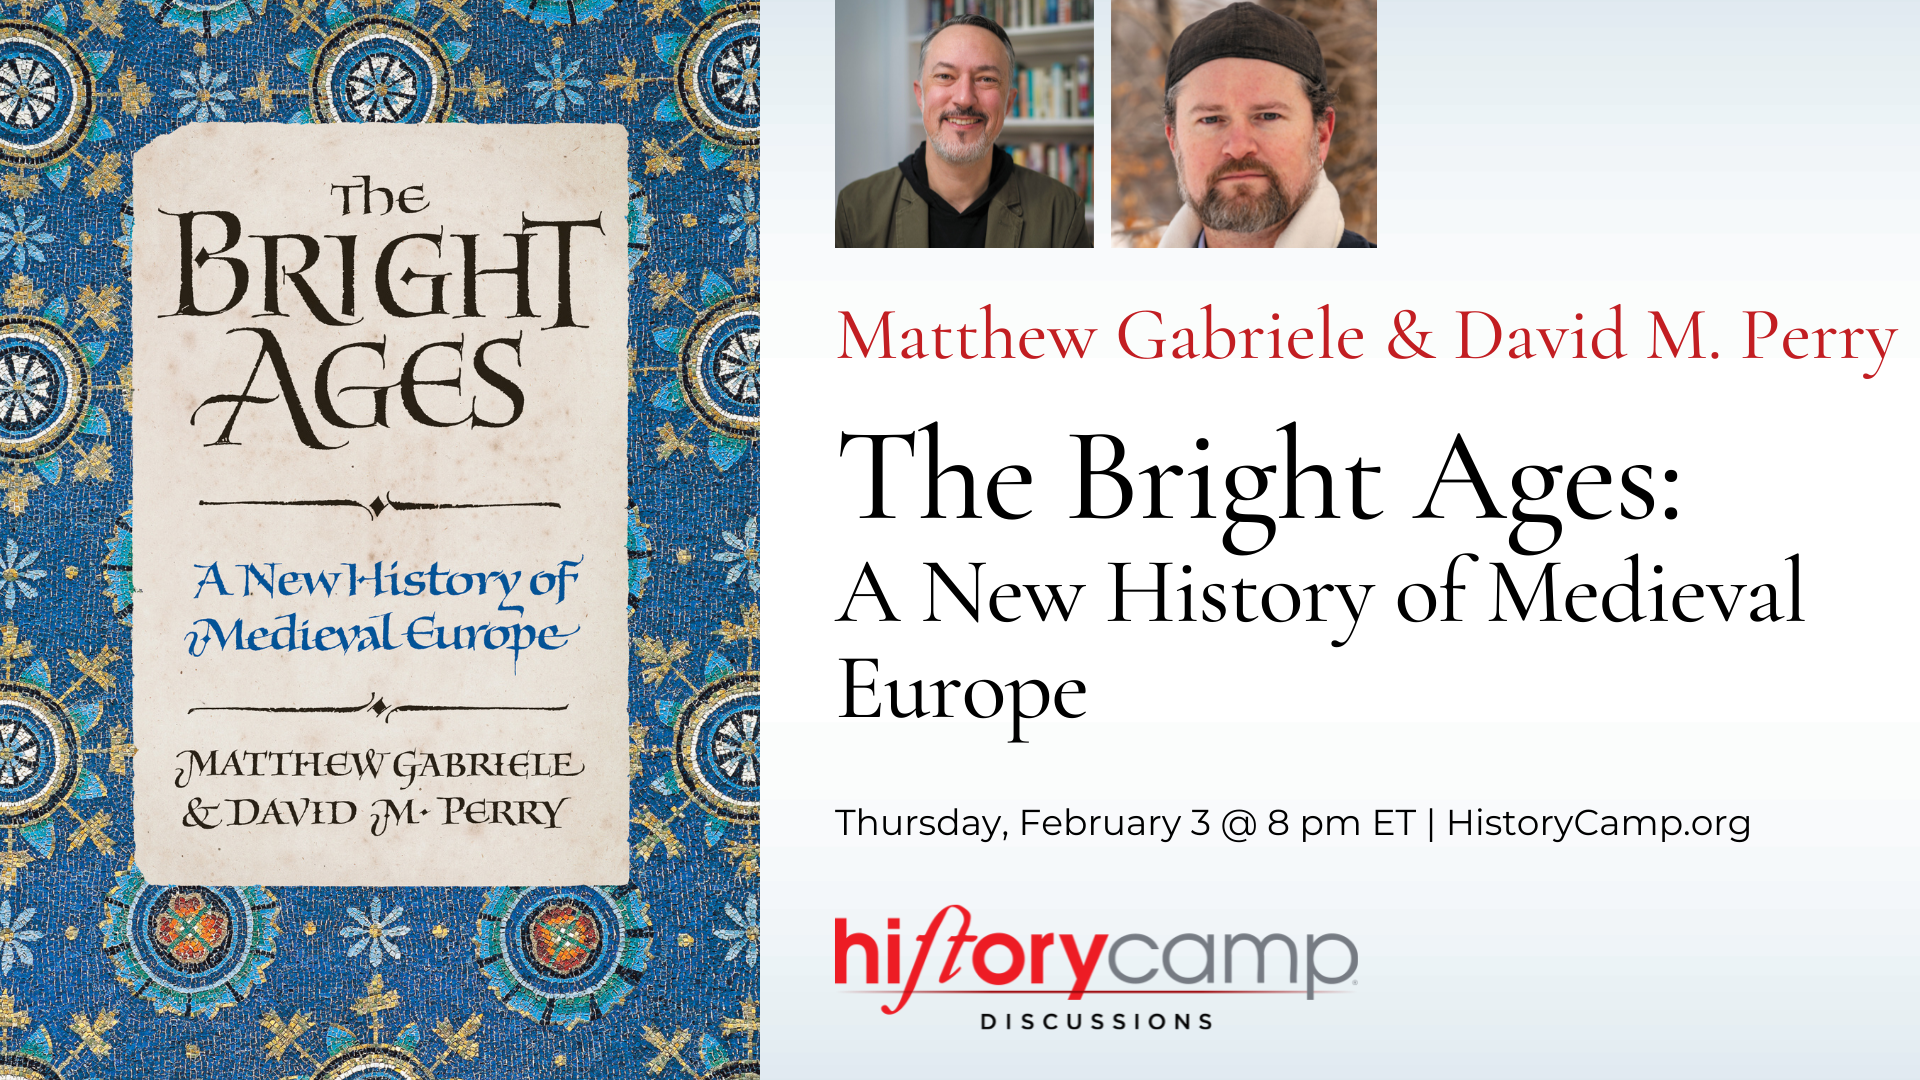 Matthew Gabriele & David Perry - Bright Ages